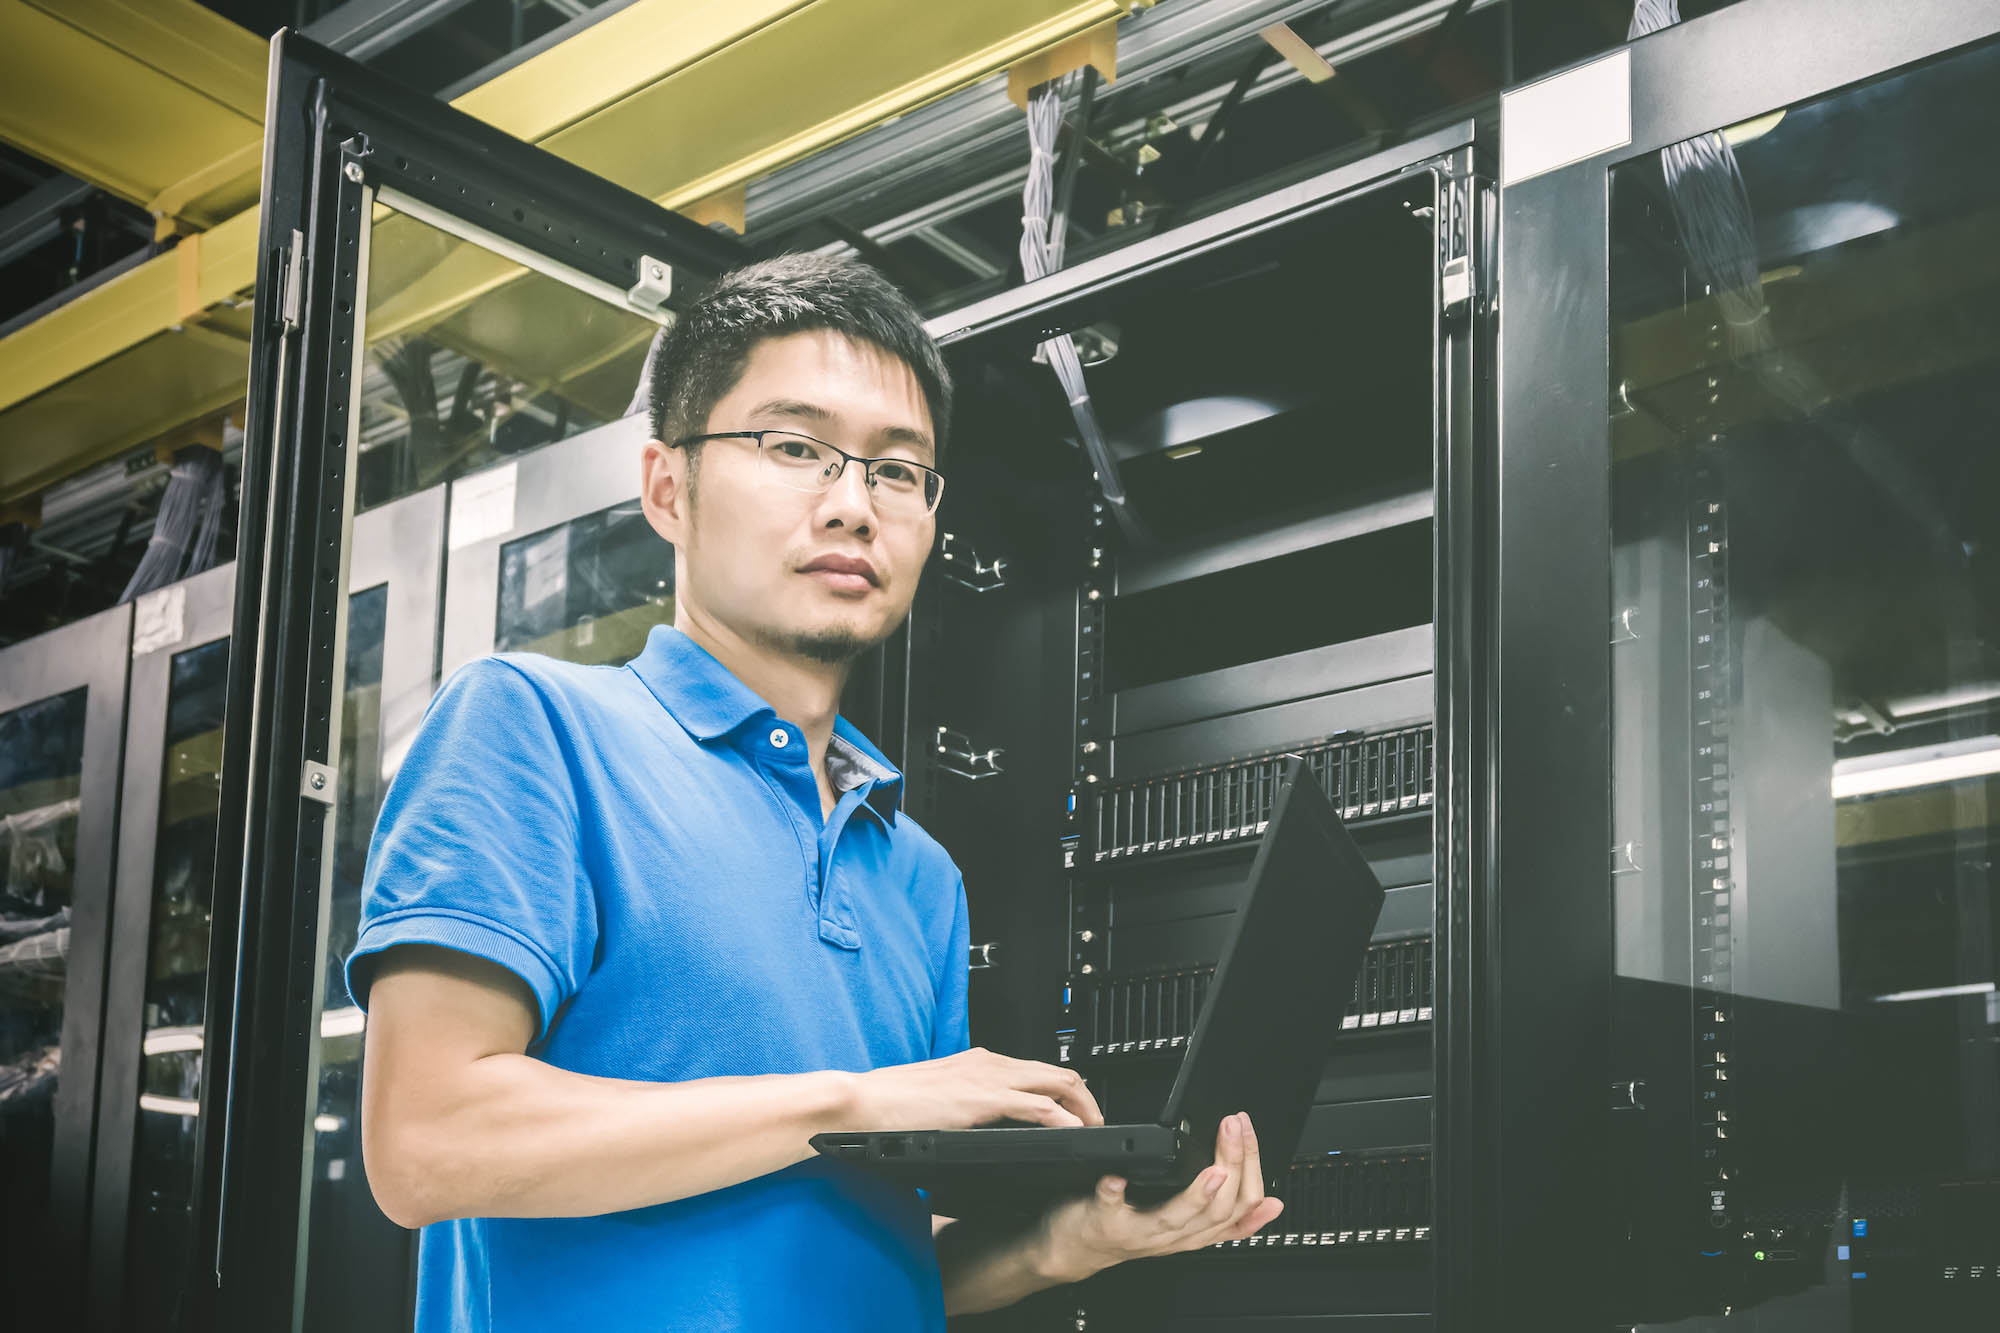 Man in blue shirt using a laptop while standing in front of a server rack.